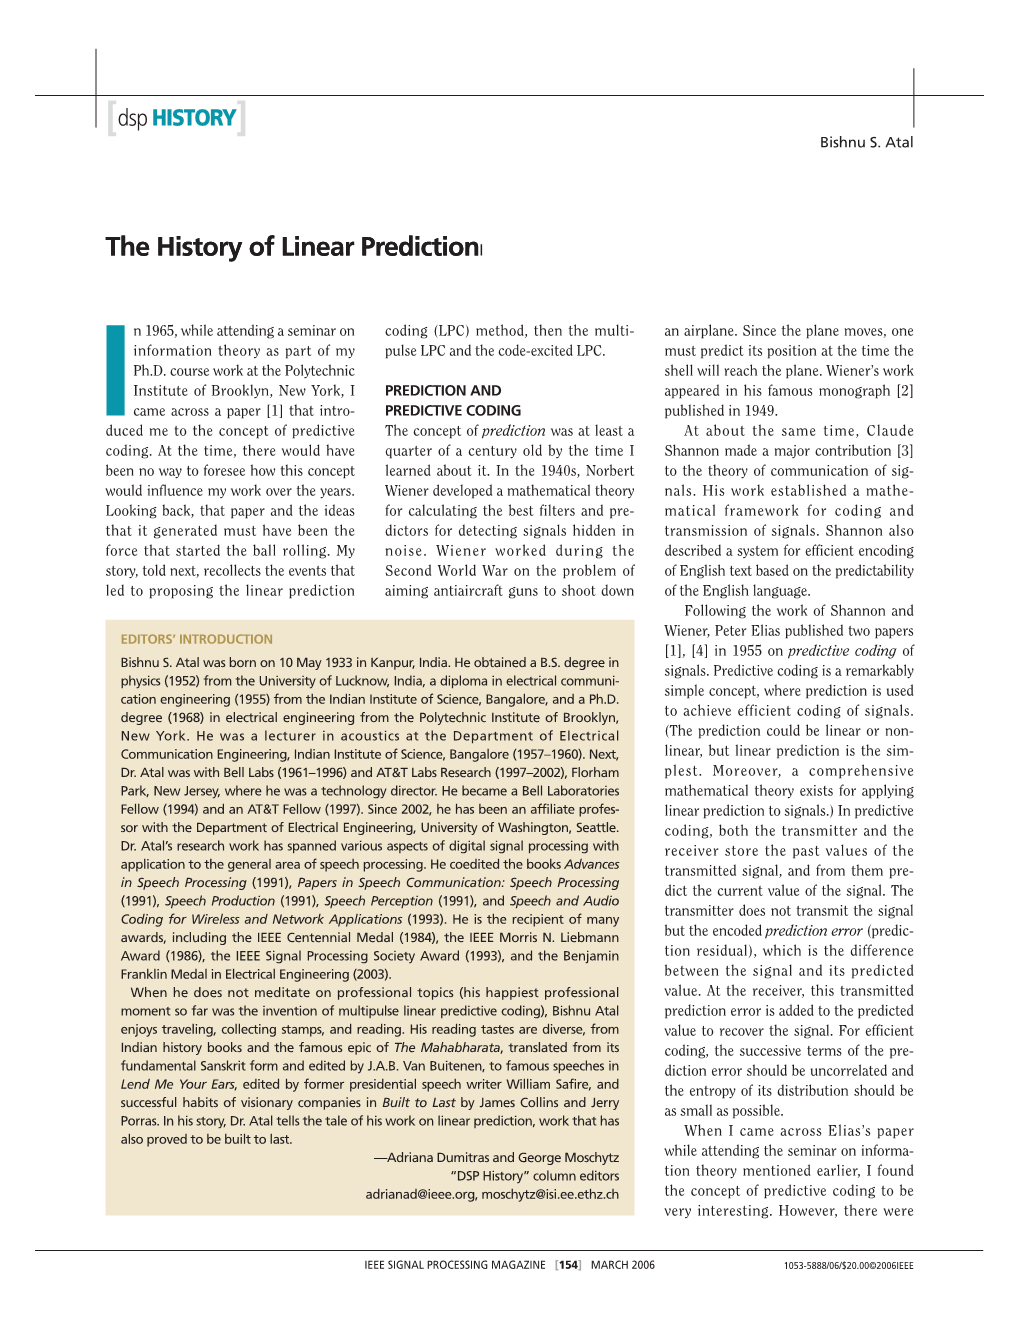 The History of Linear Prediction the History of Linear Predictionl